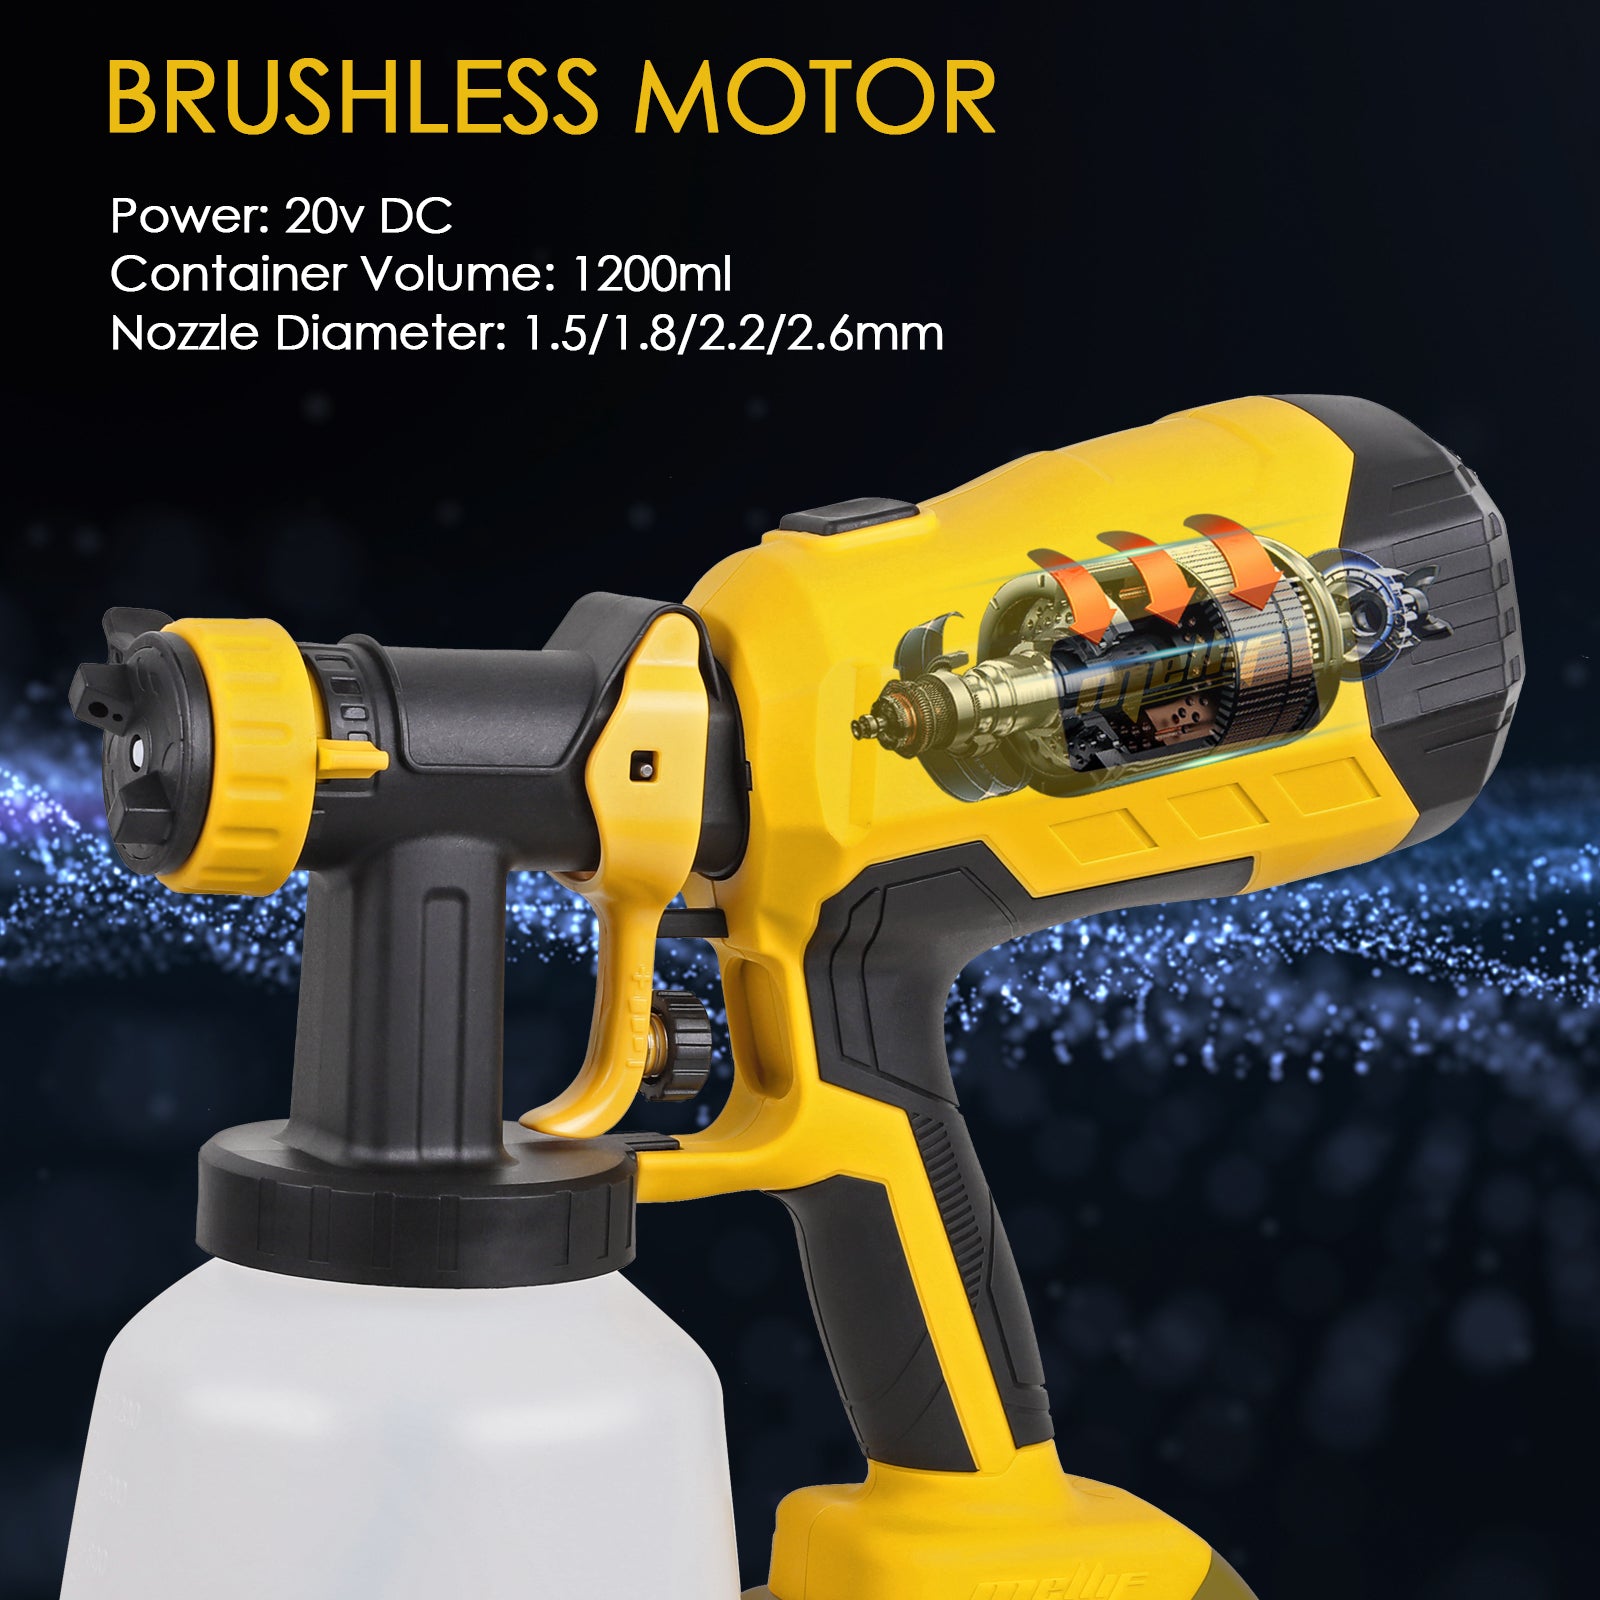 Litheli HVLP 20V Paint Sprayer with Brushless Motor, Cordless Paint Gun  with 2.0 Ah Battery & Charger 